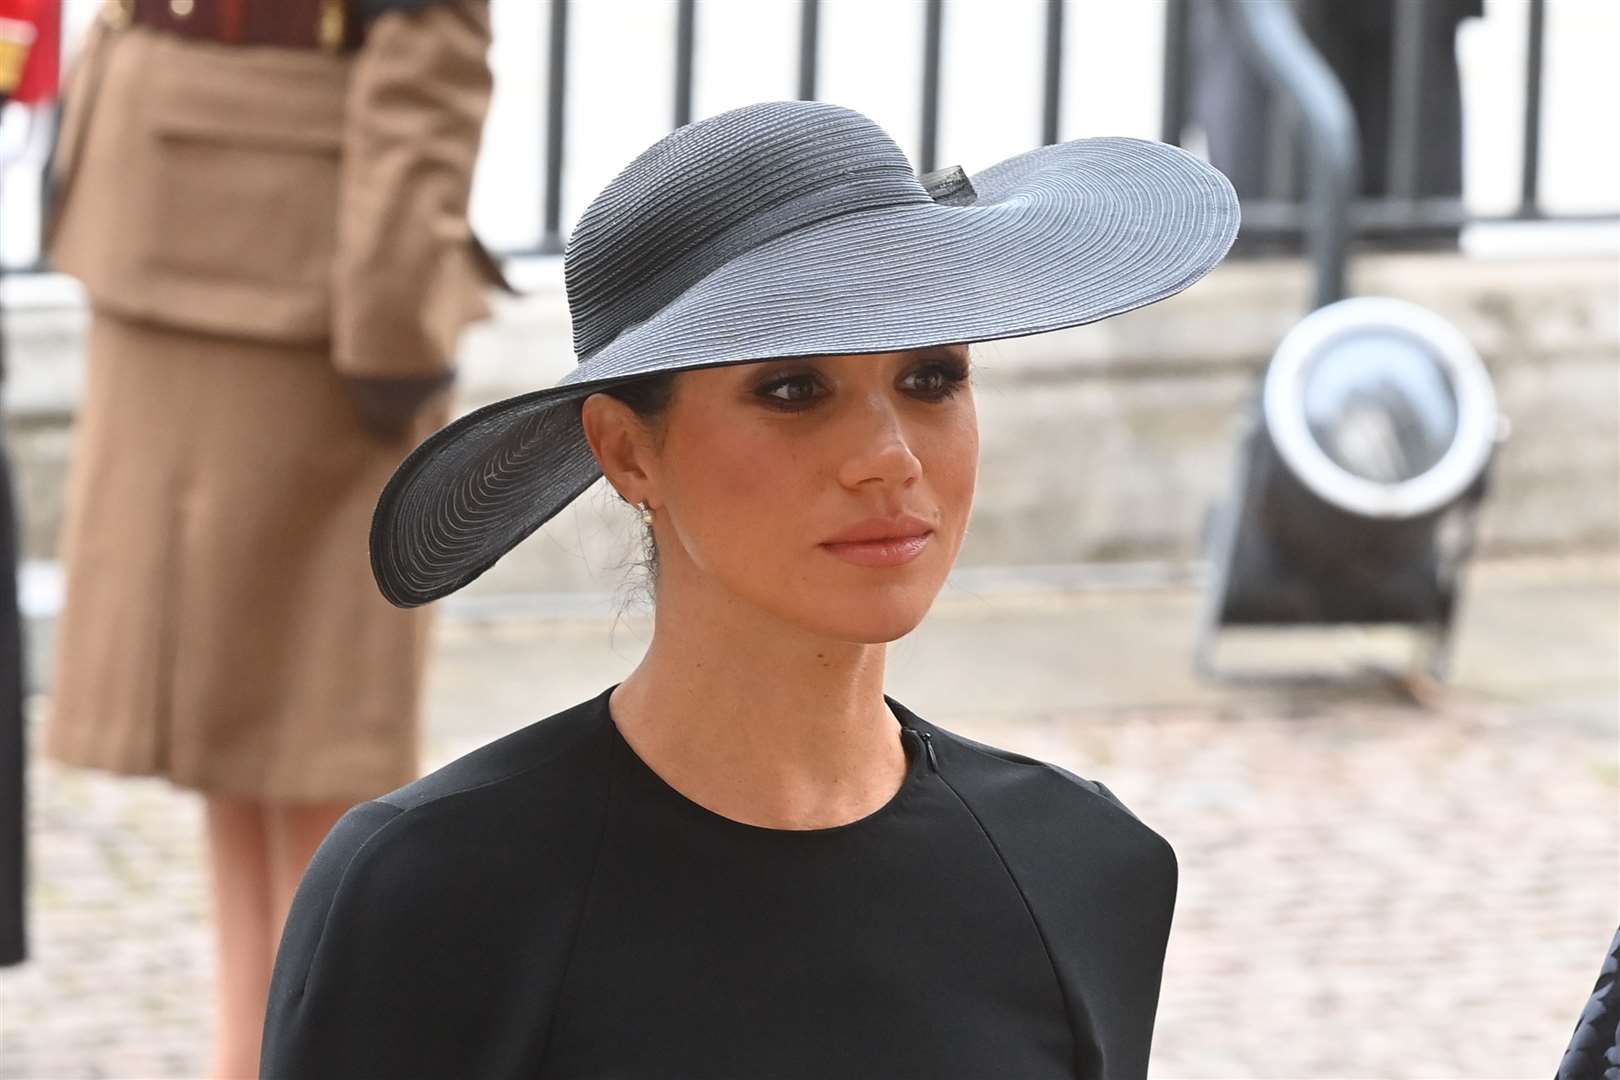 The Duchess of Sussex said the media would ‘plant the most salacious stories’ in the lead up to her wedding (PA)